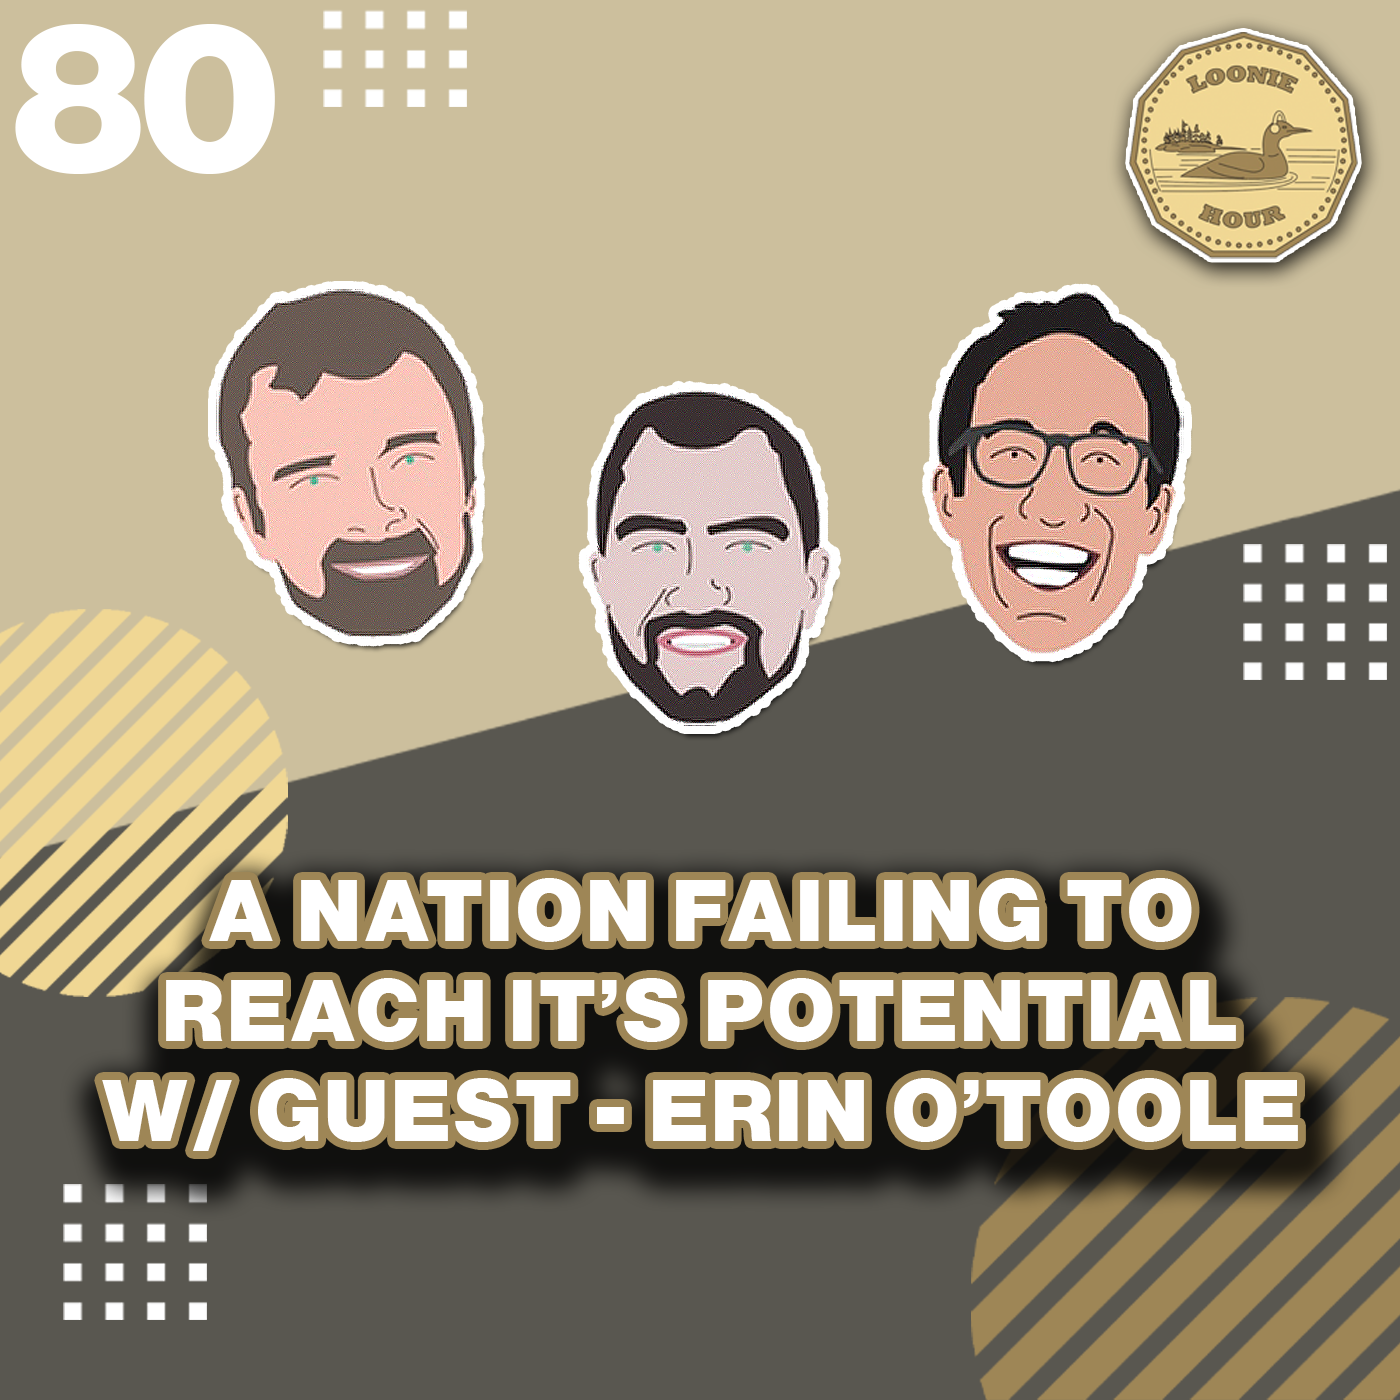 A Nation Failing To Reach it’s Potential- with guest Erin O’Toole